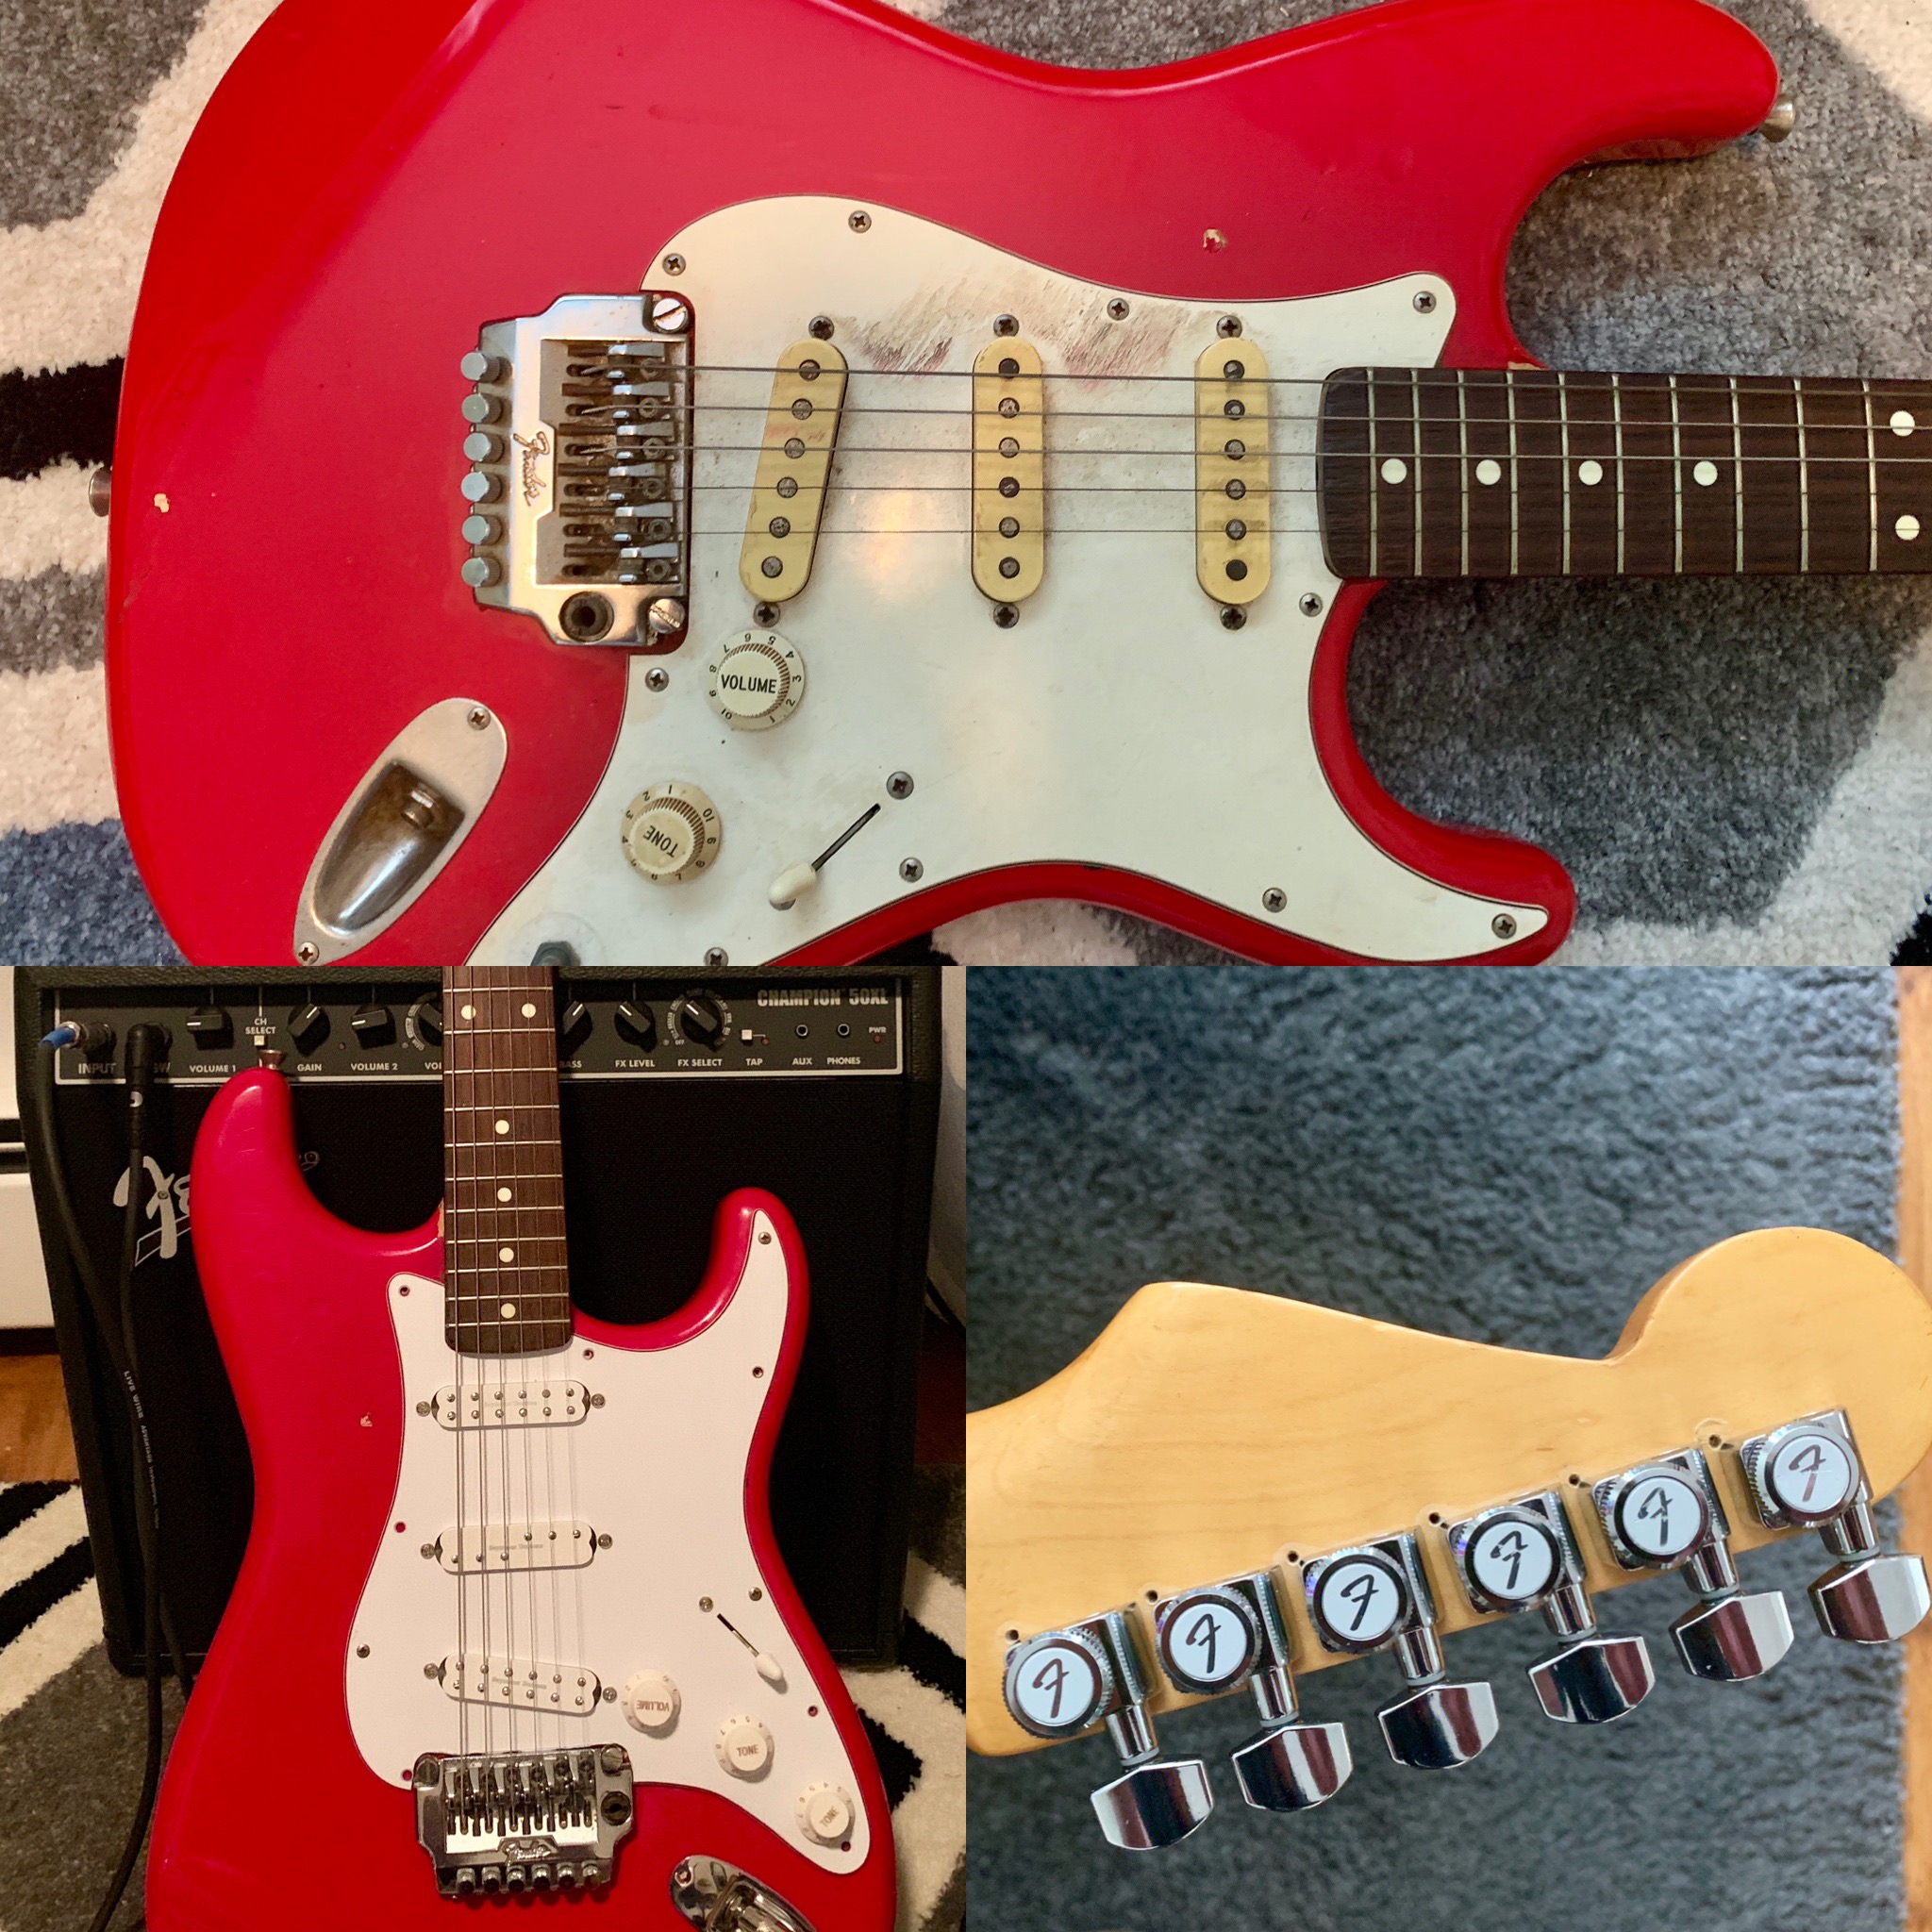 This guitar is a 1987 Japanese Fender Stratocaster Squier